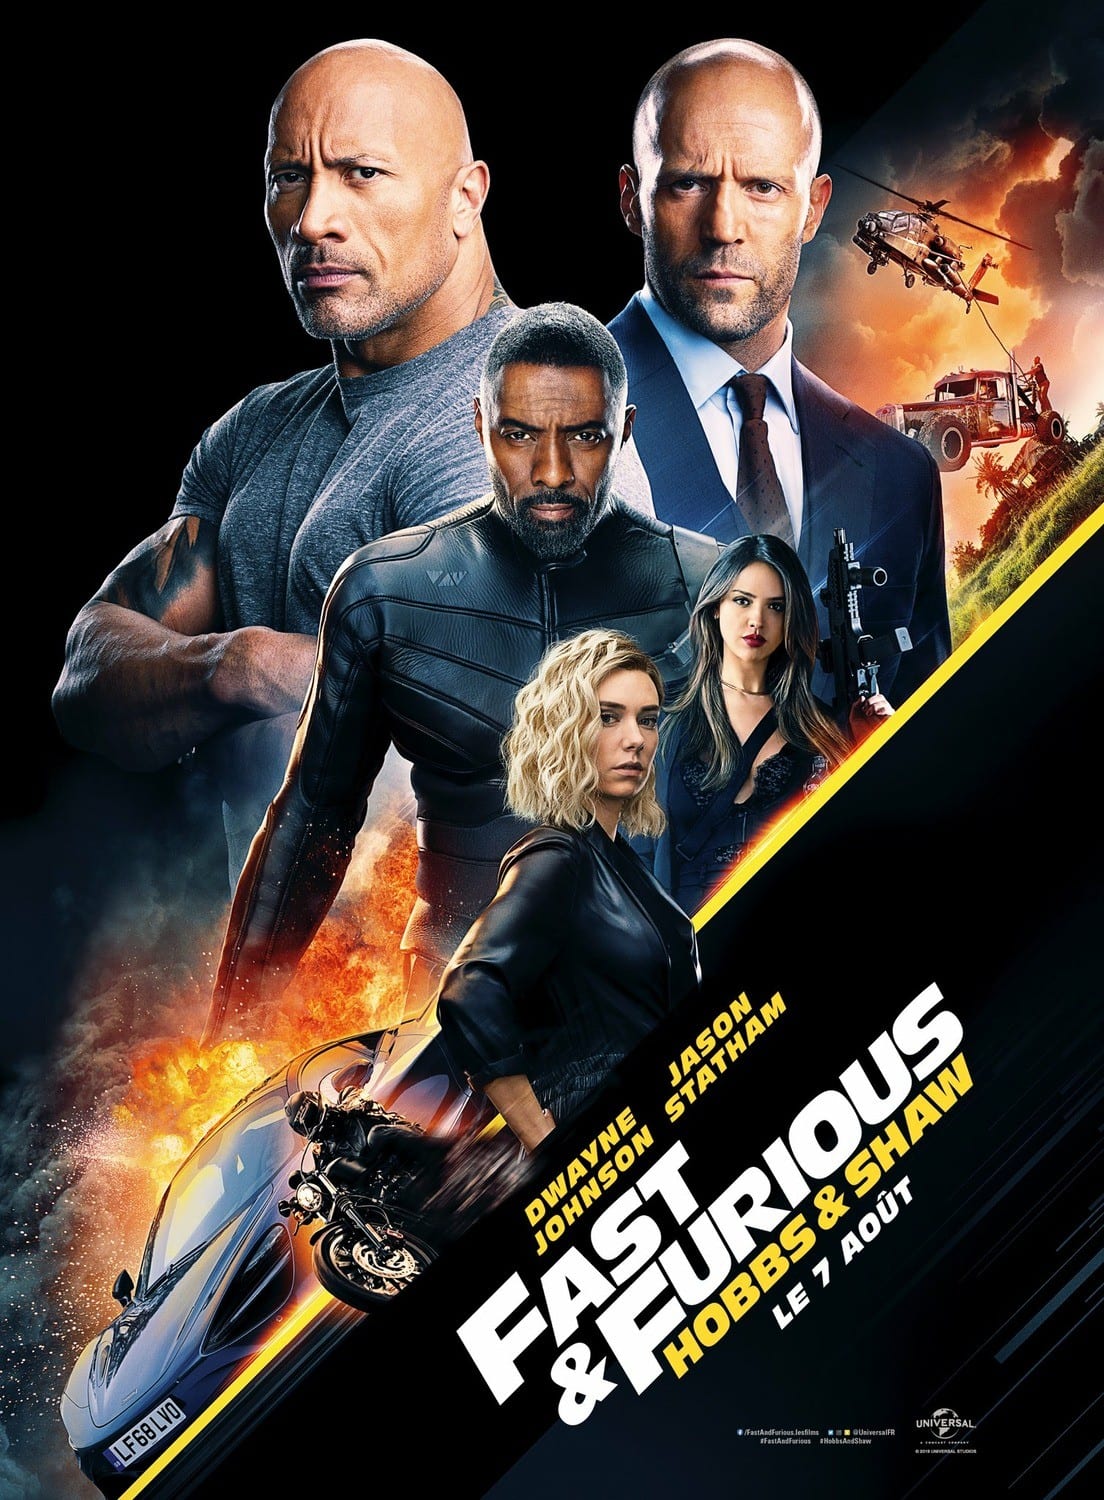 Fast & Furious Presents: Hobbs & Shaw (eng) - Днепр. Афиша Днепра